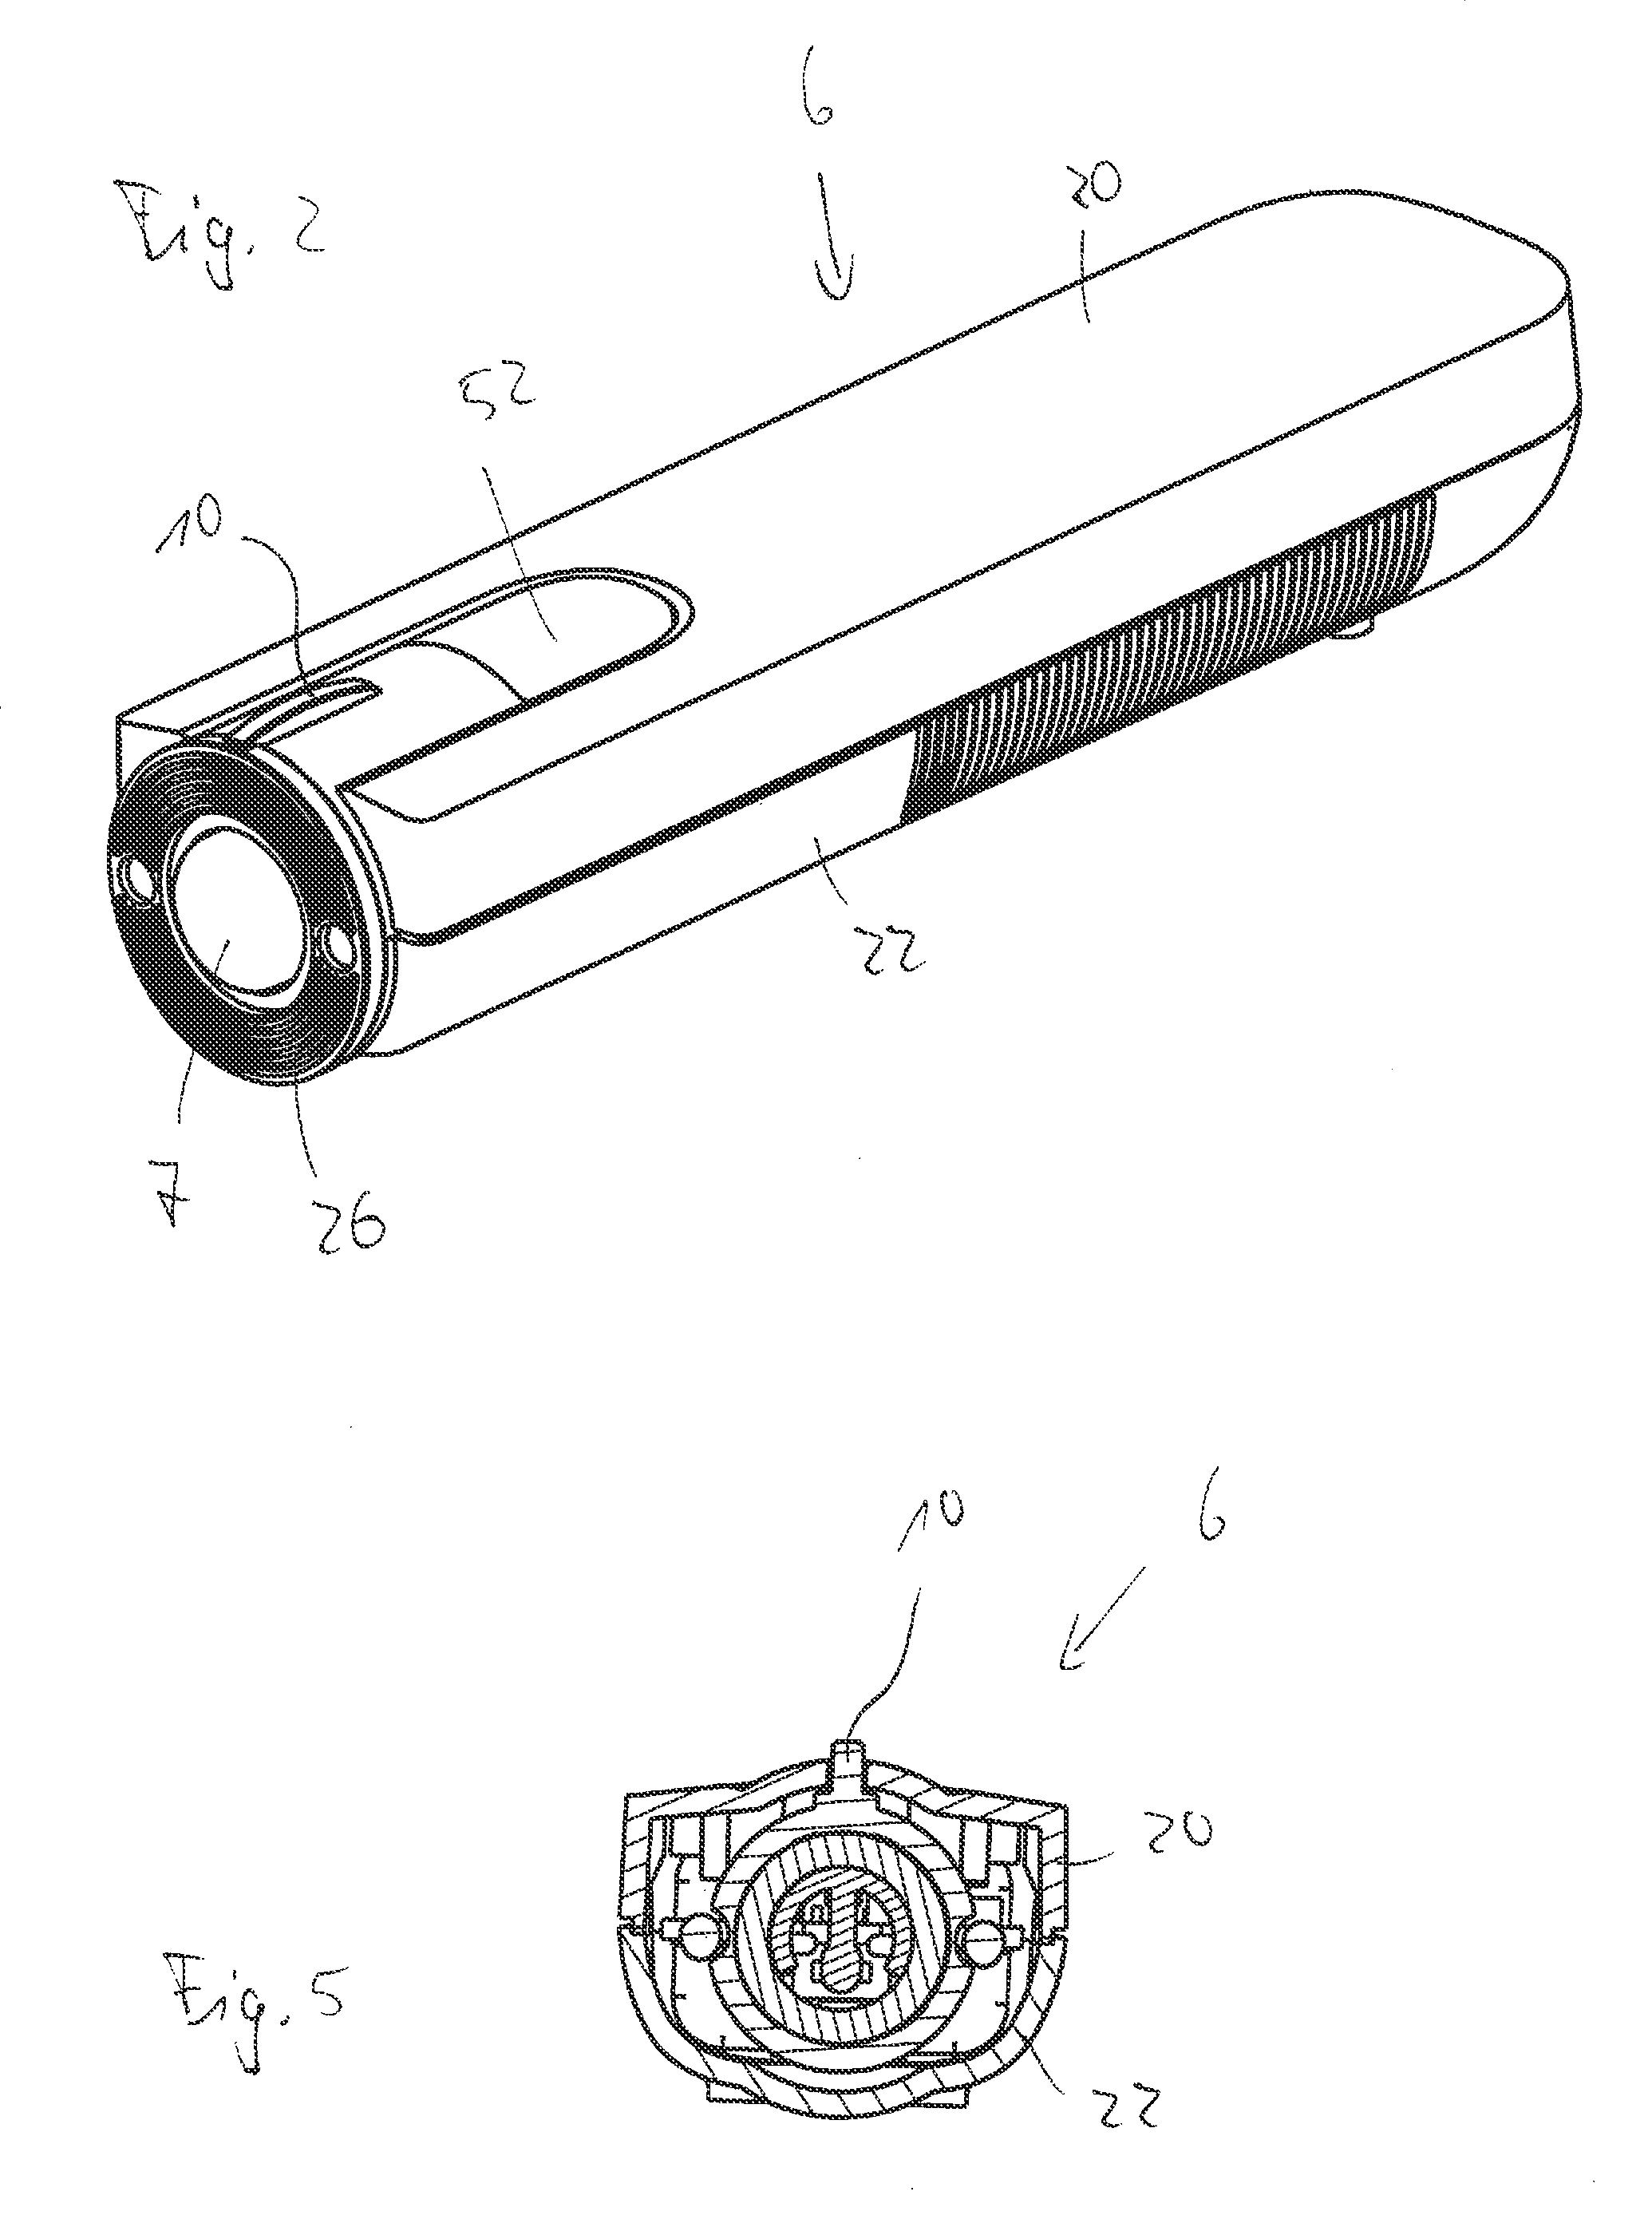 Device and method for measuring the level of a liquid within a container